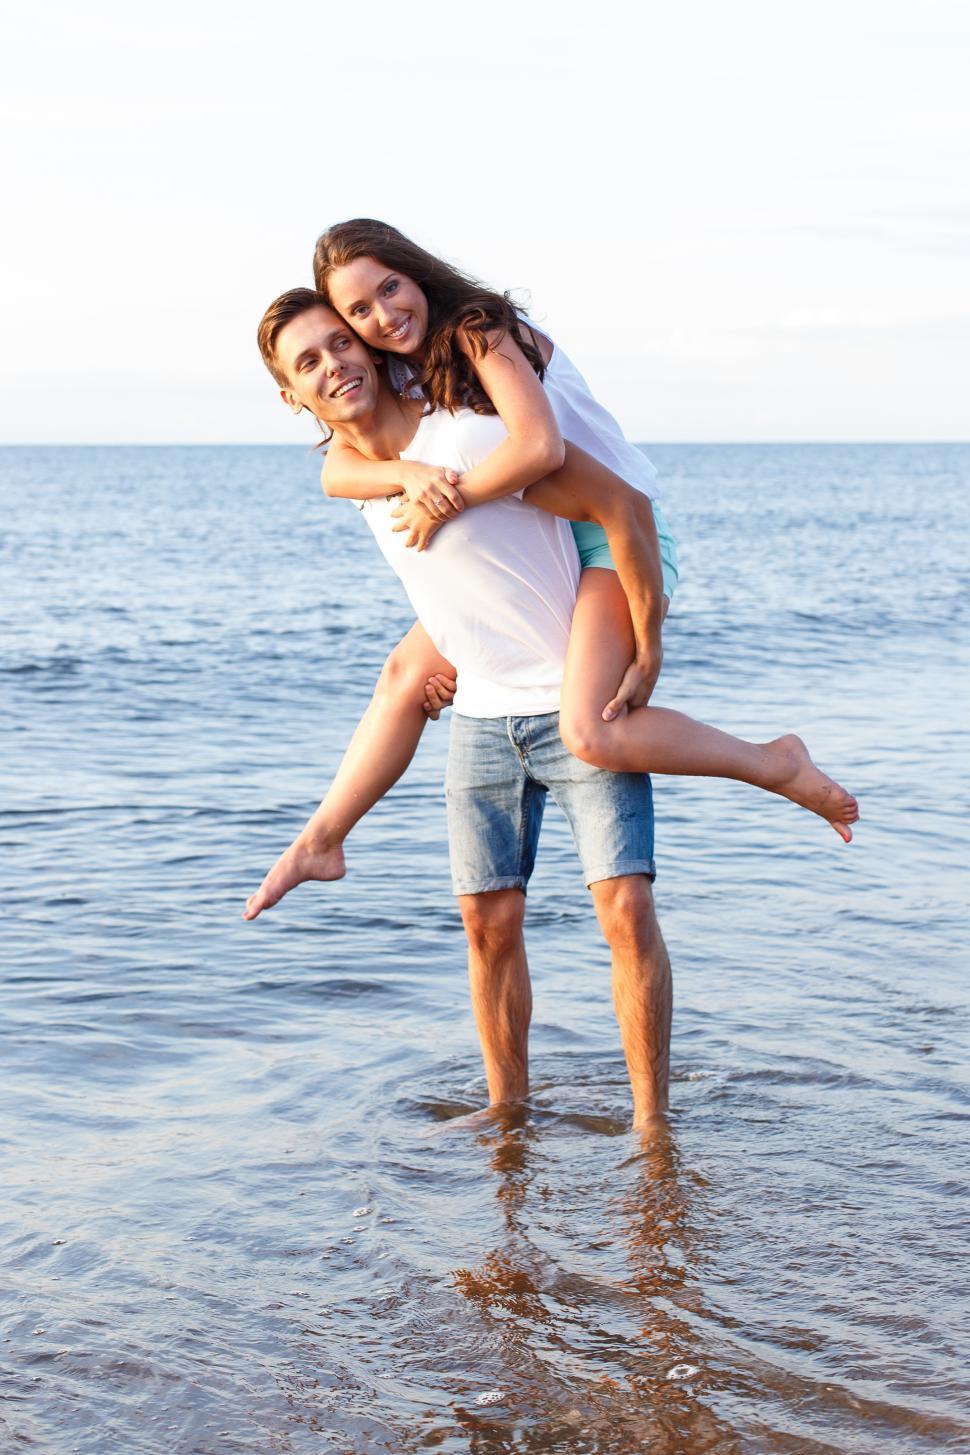 Free Image of Beautiful couple playing in the surf 